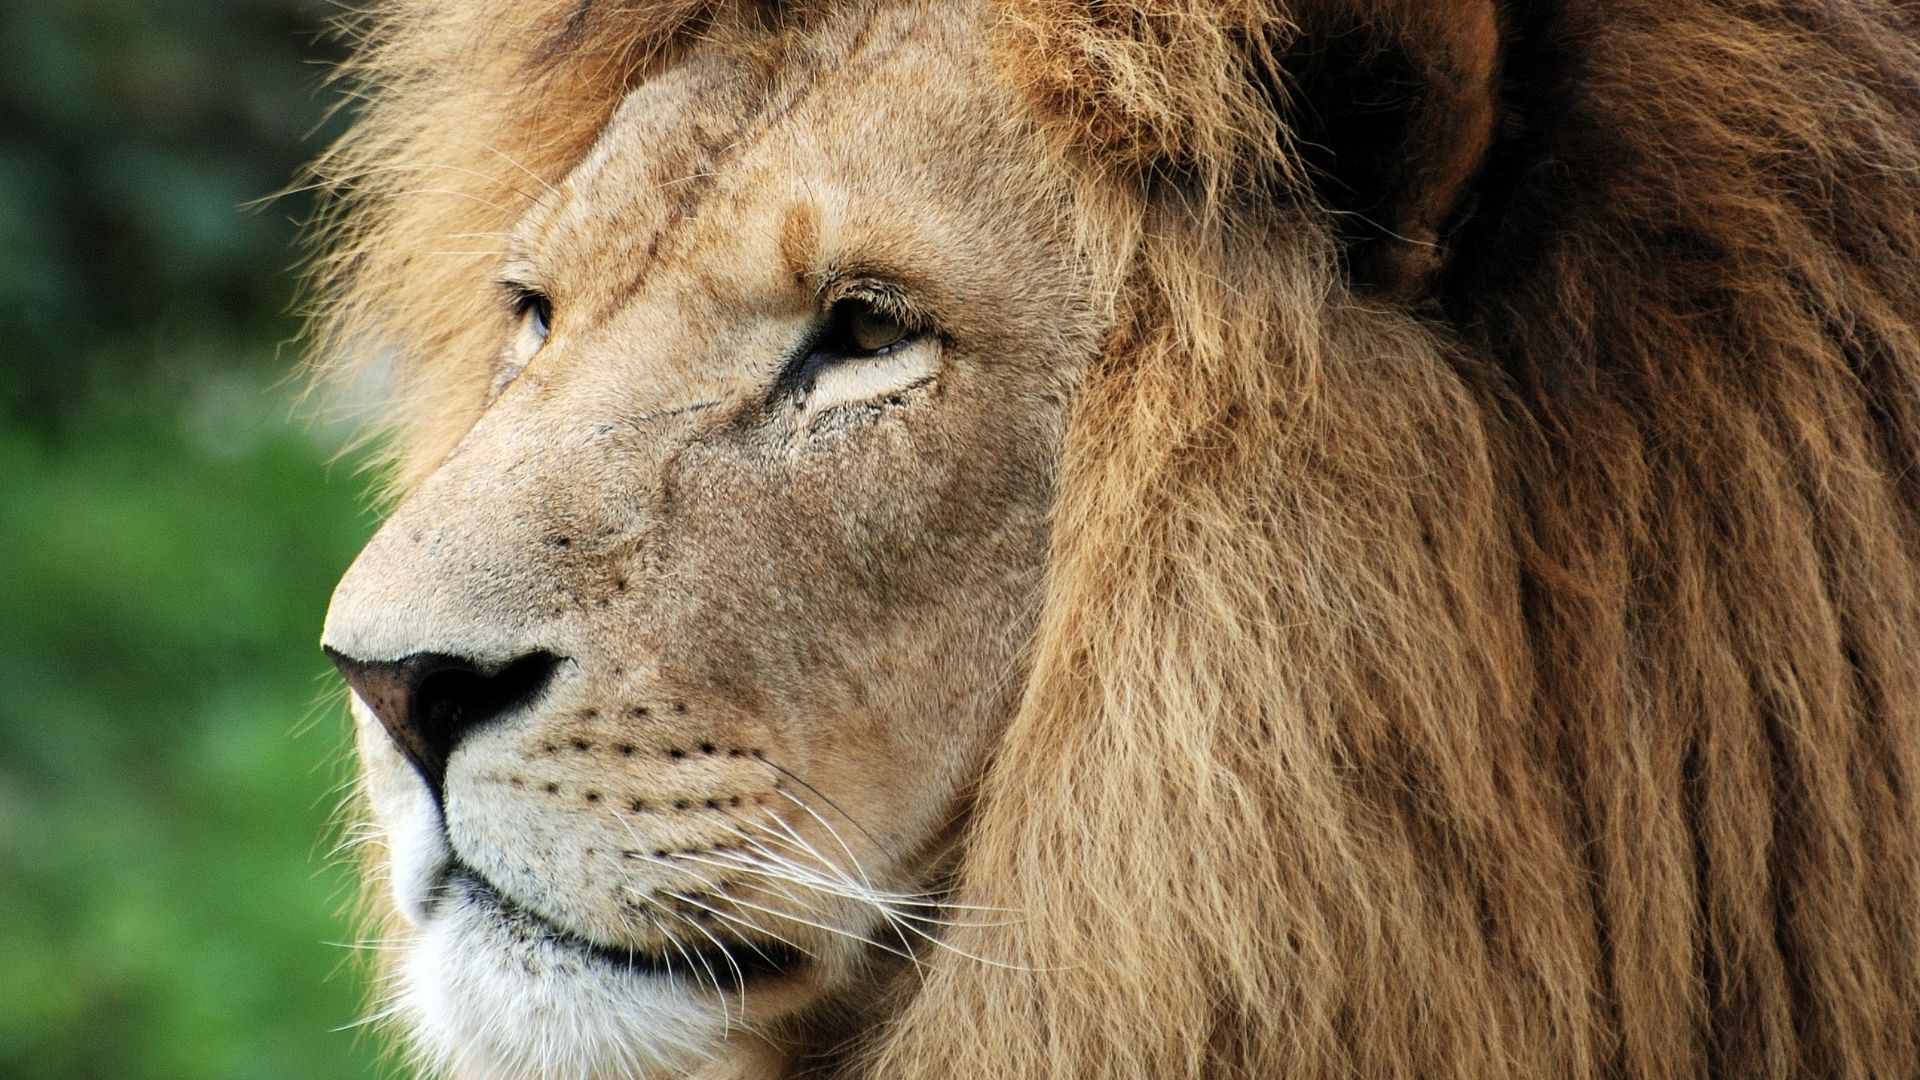 Episode 444 Do You Know - What Do You Know About Lions